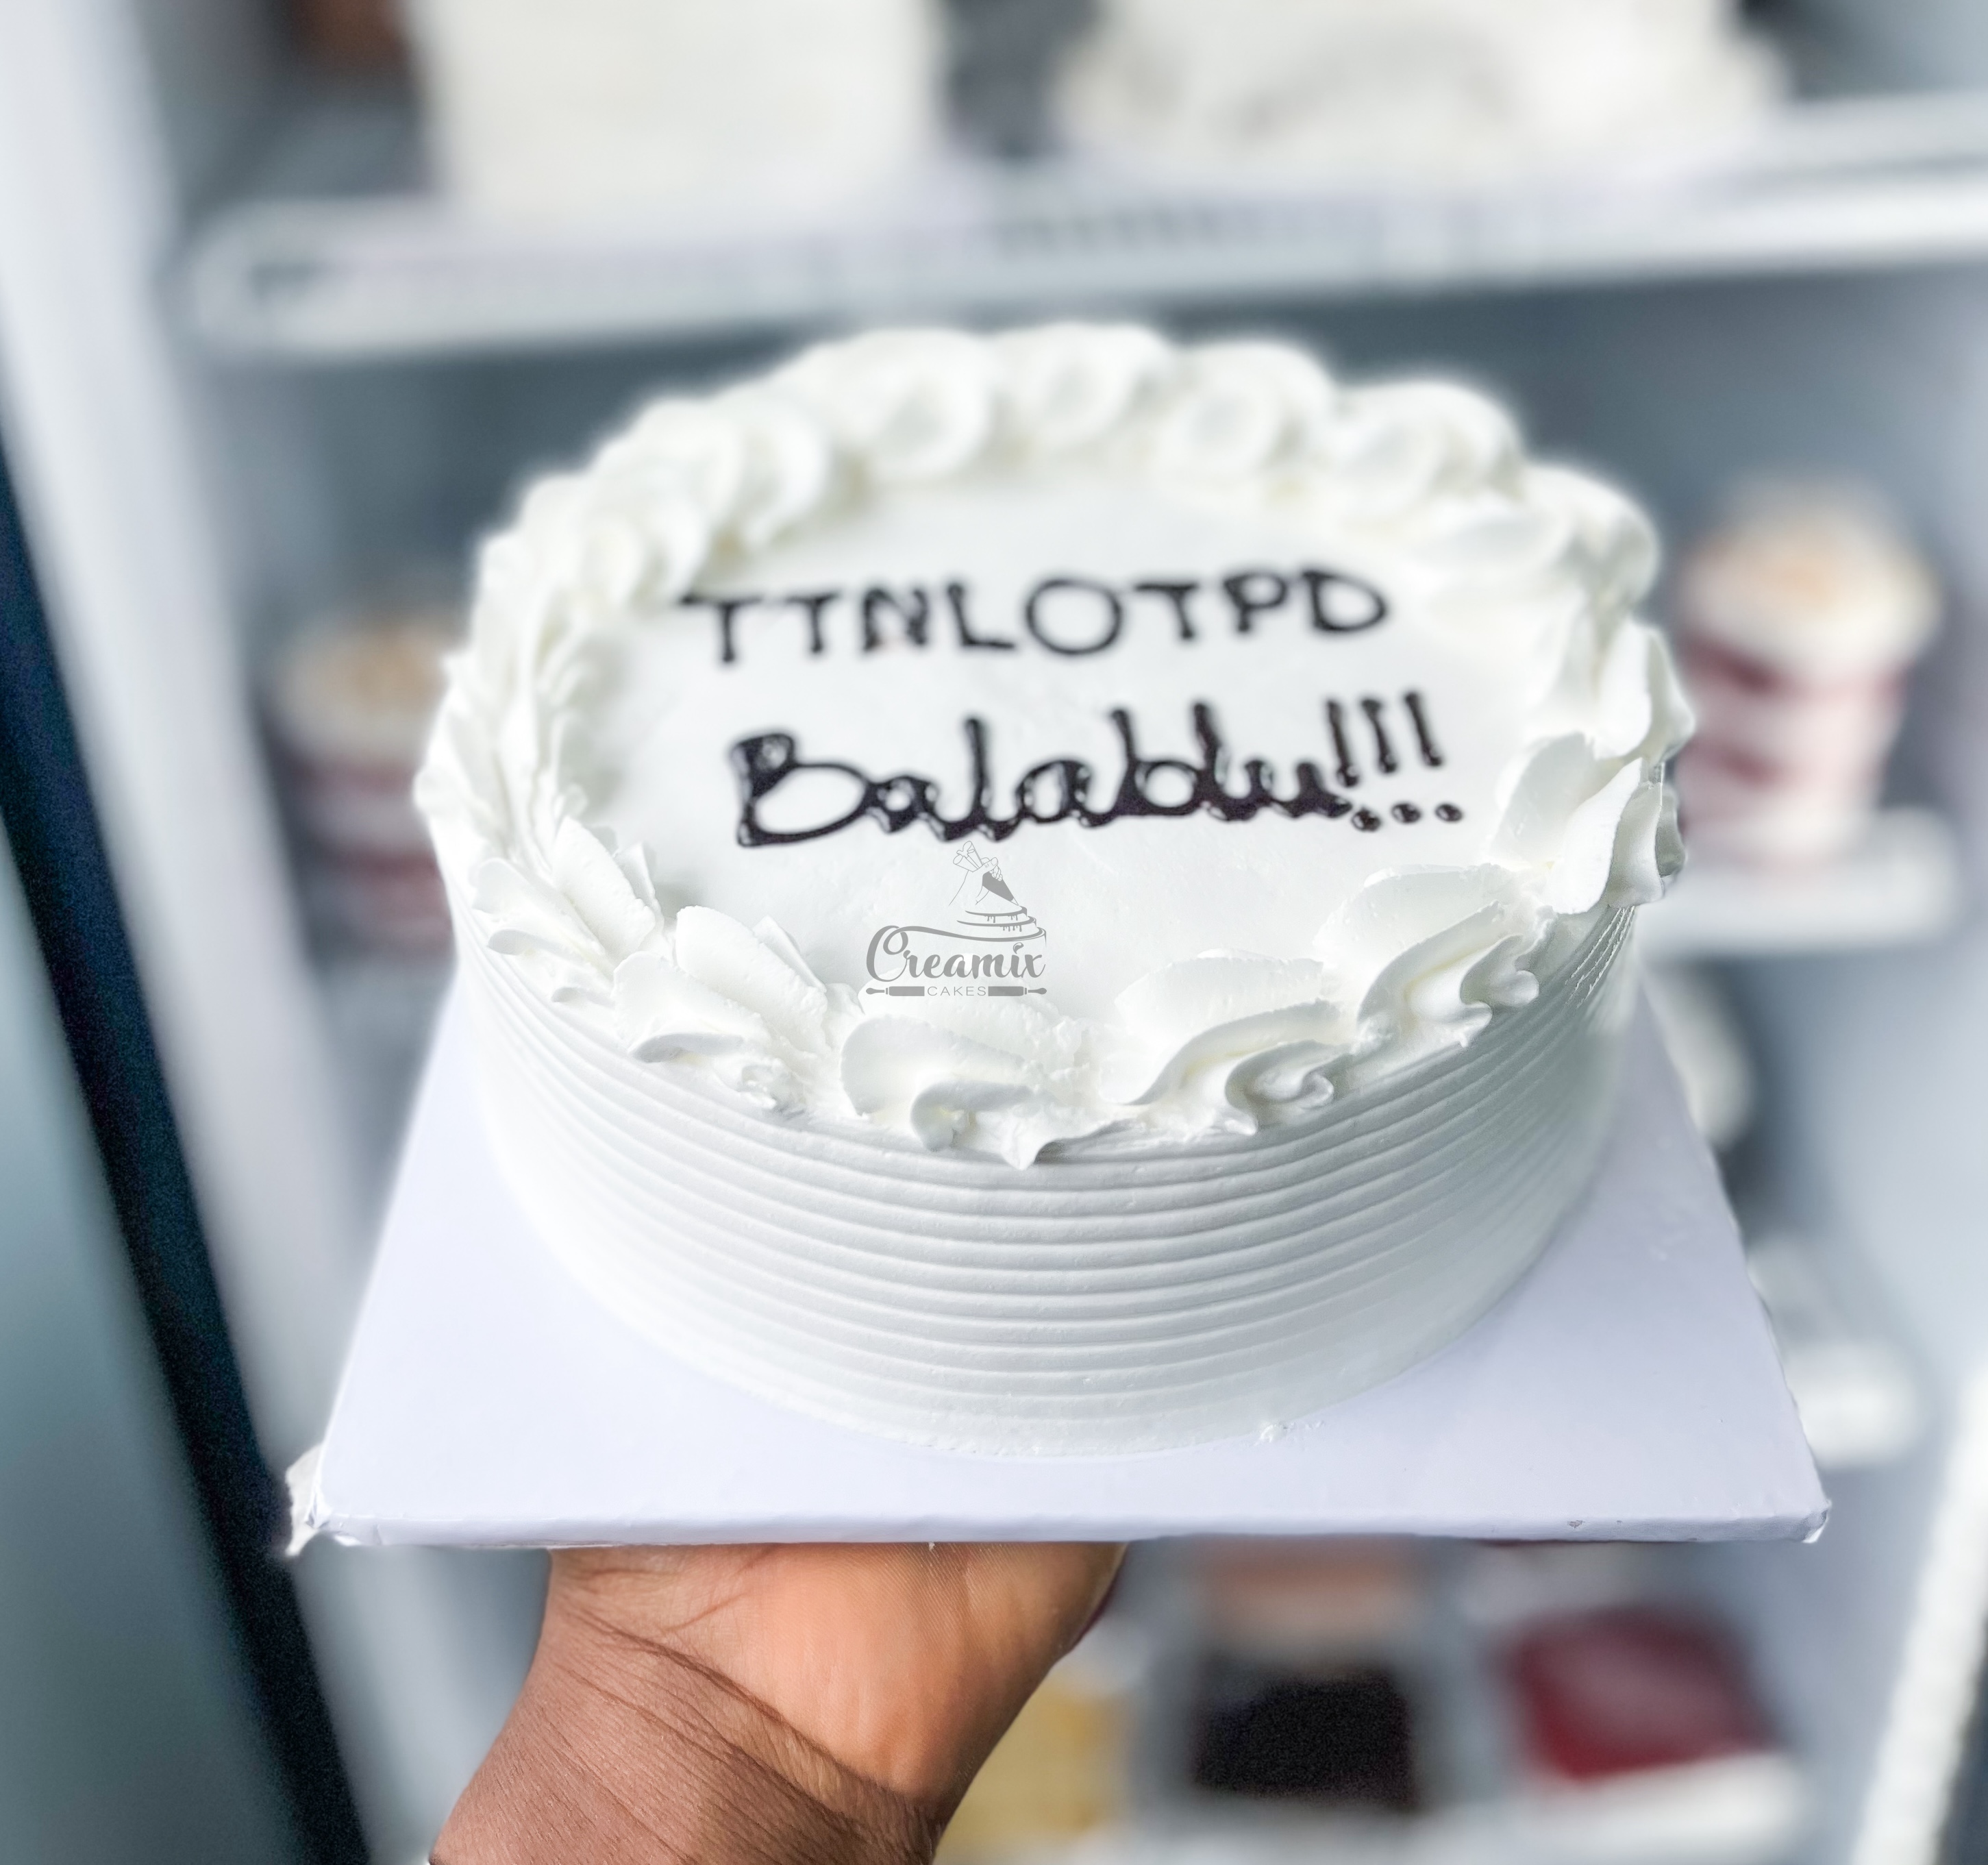 7 inch Single Layer Whipped Cream Cake - Available in Vanilla, Red Velvet, Chocolate